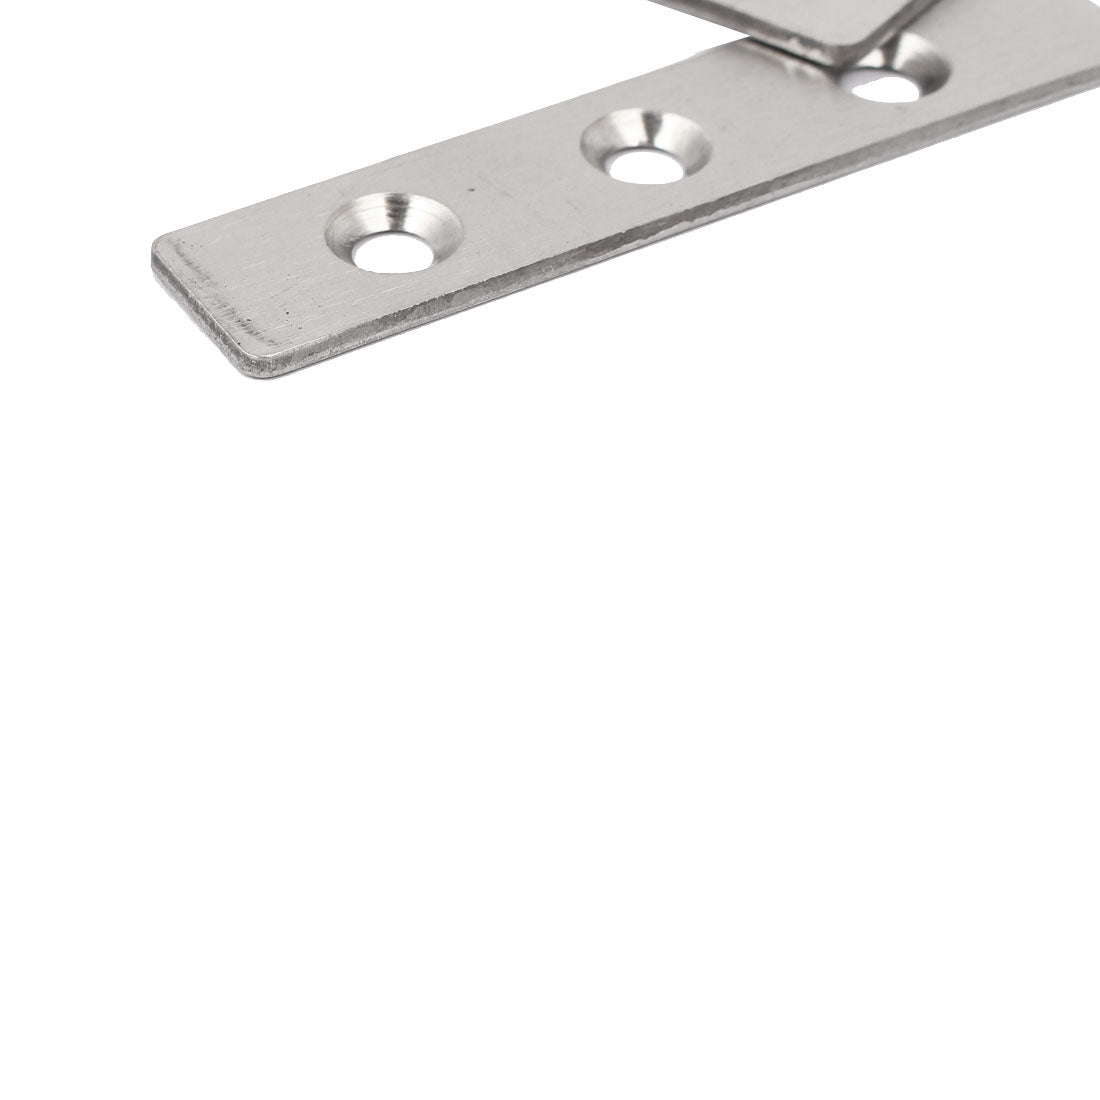 uxcell Uxcell Cupboard Door Box Stainless Steel Inset Offset Pivot Hinge 64mm x 21.5mm 20PCS